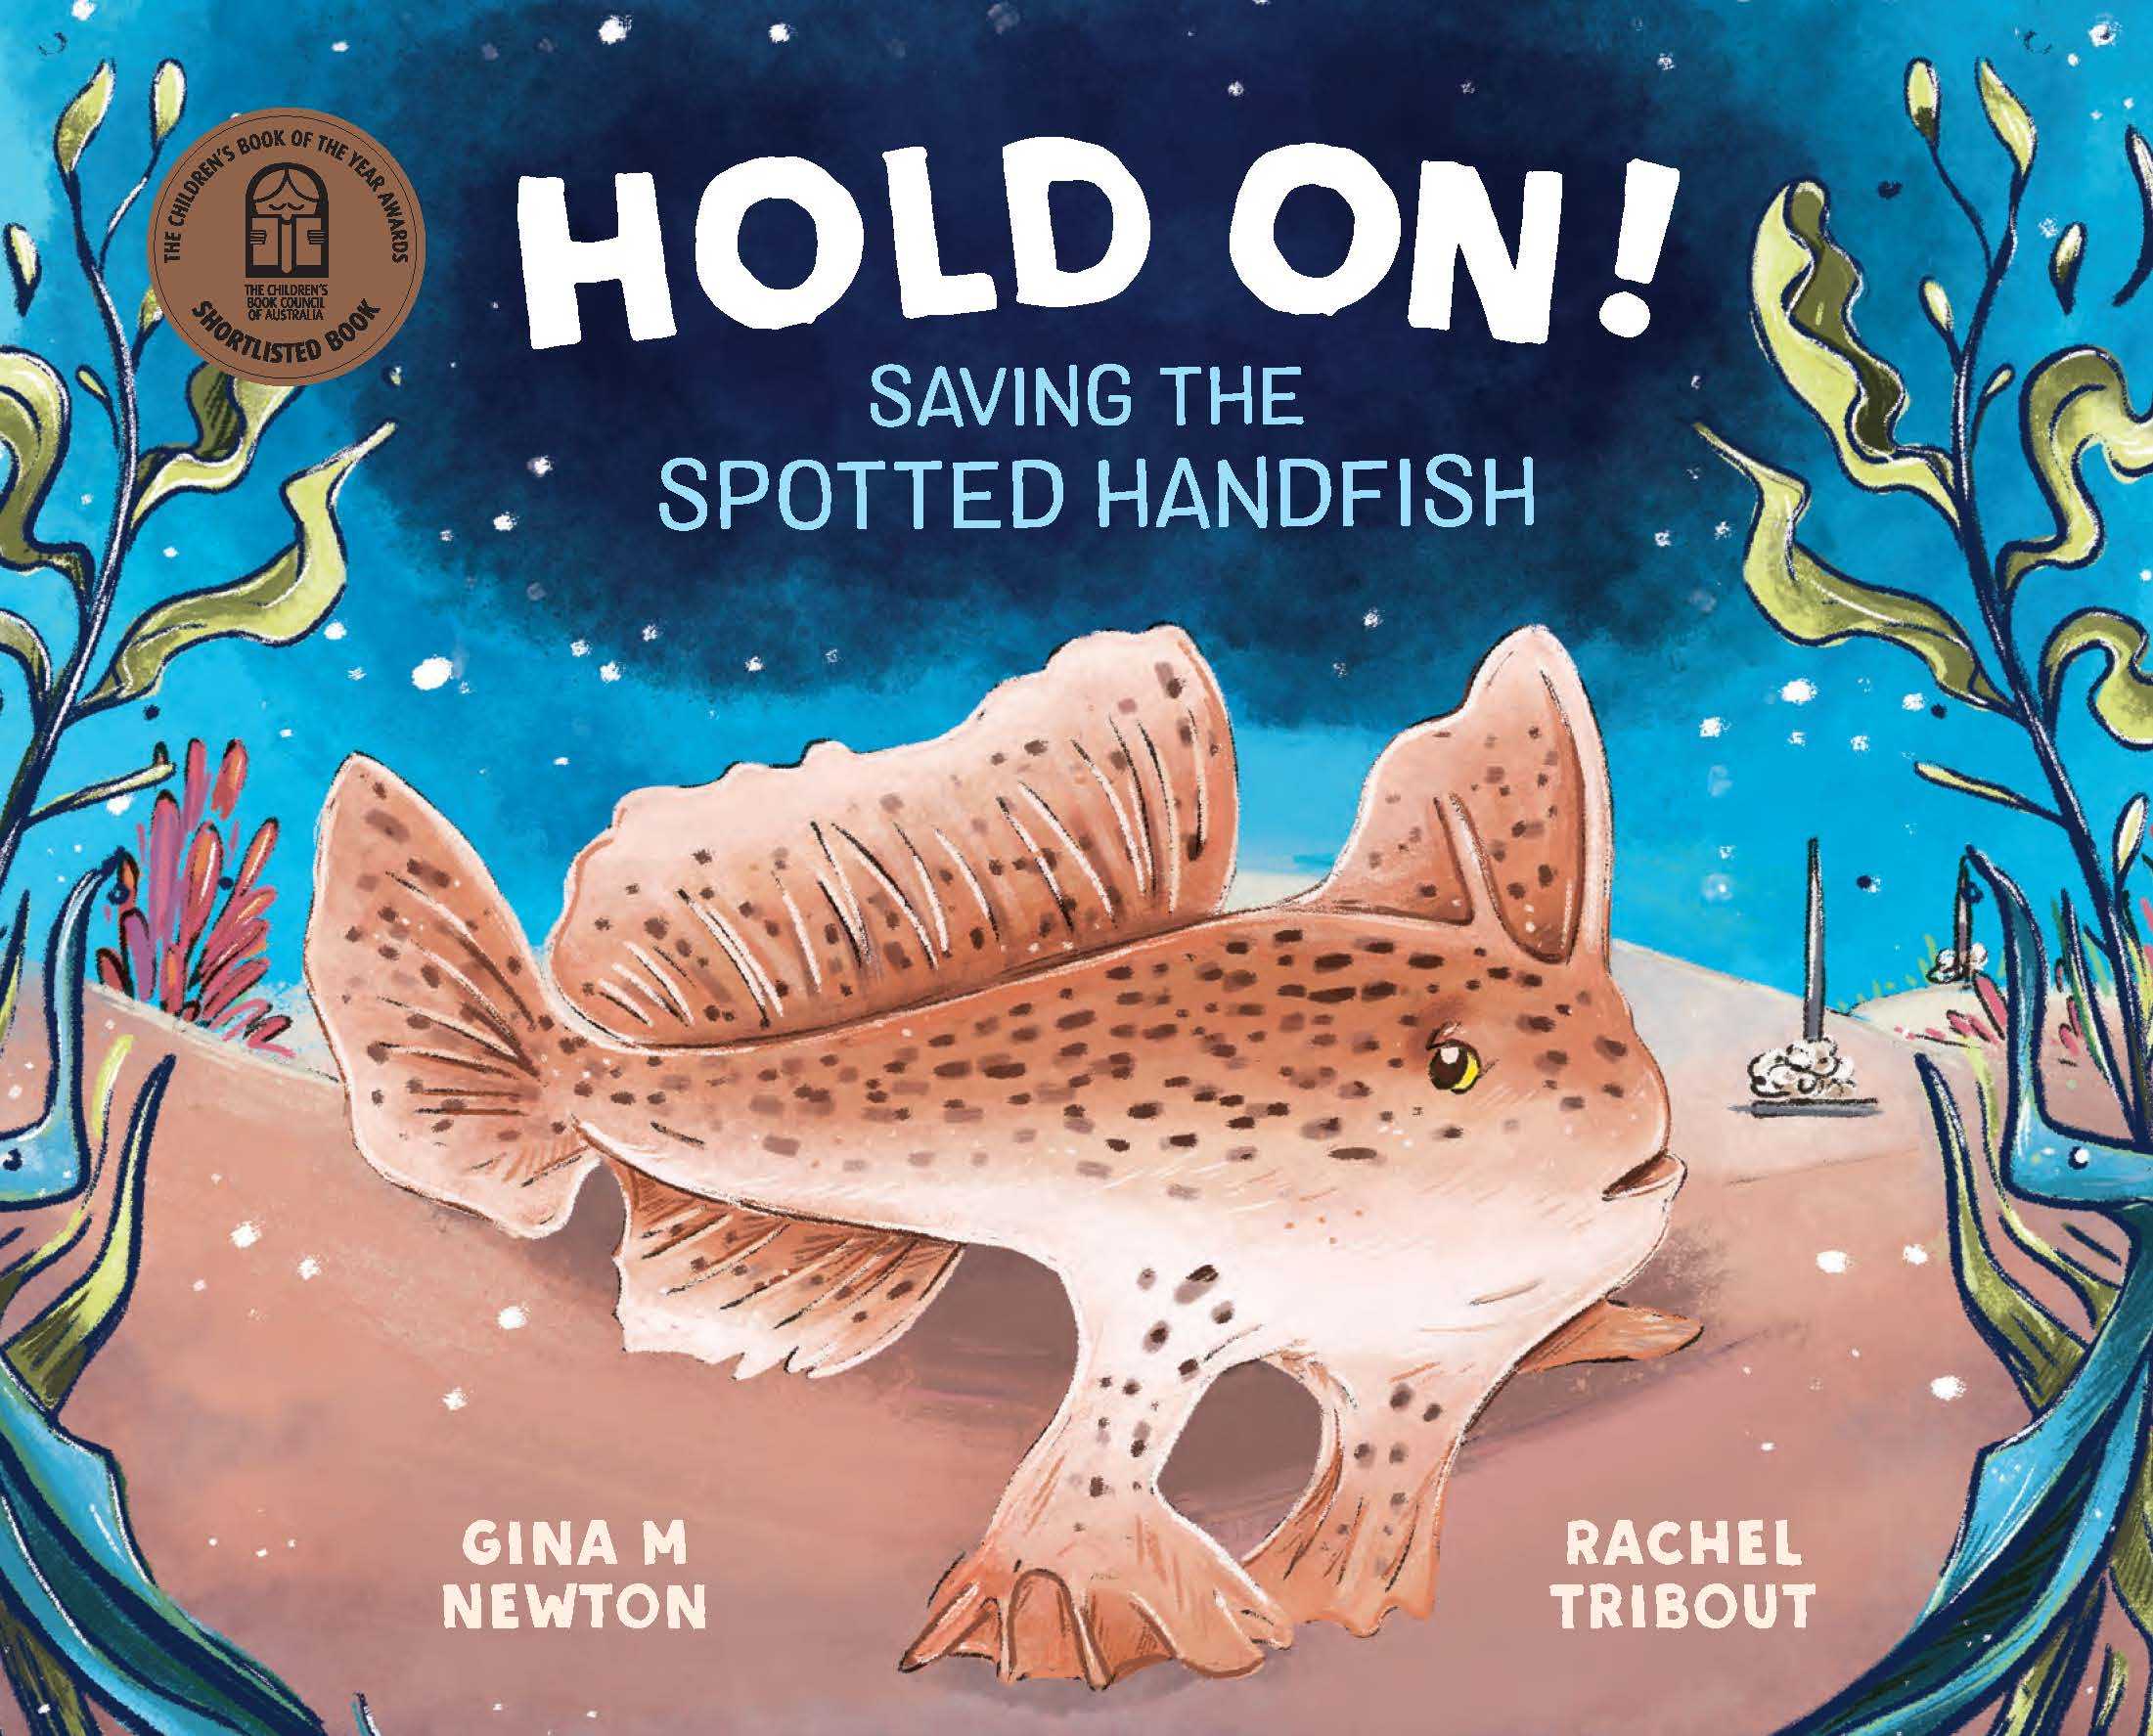 Hold on! Saving the spotted handfish